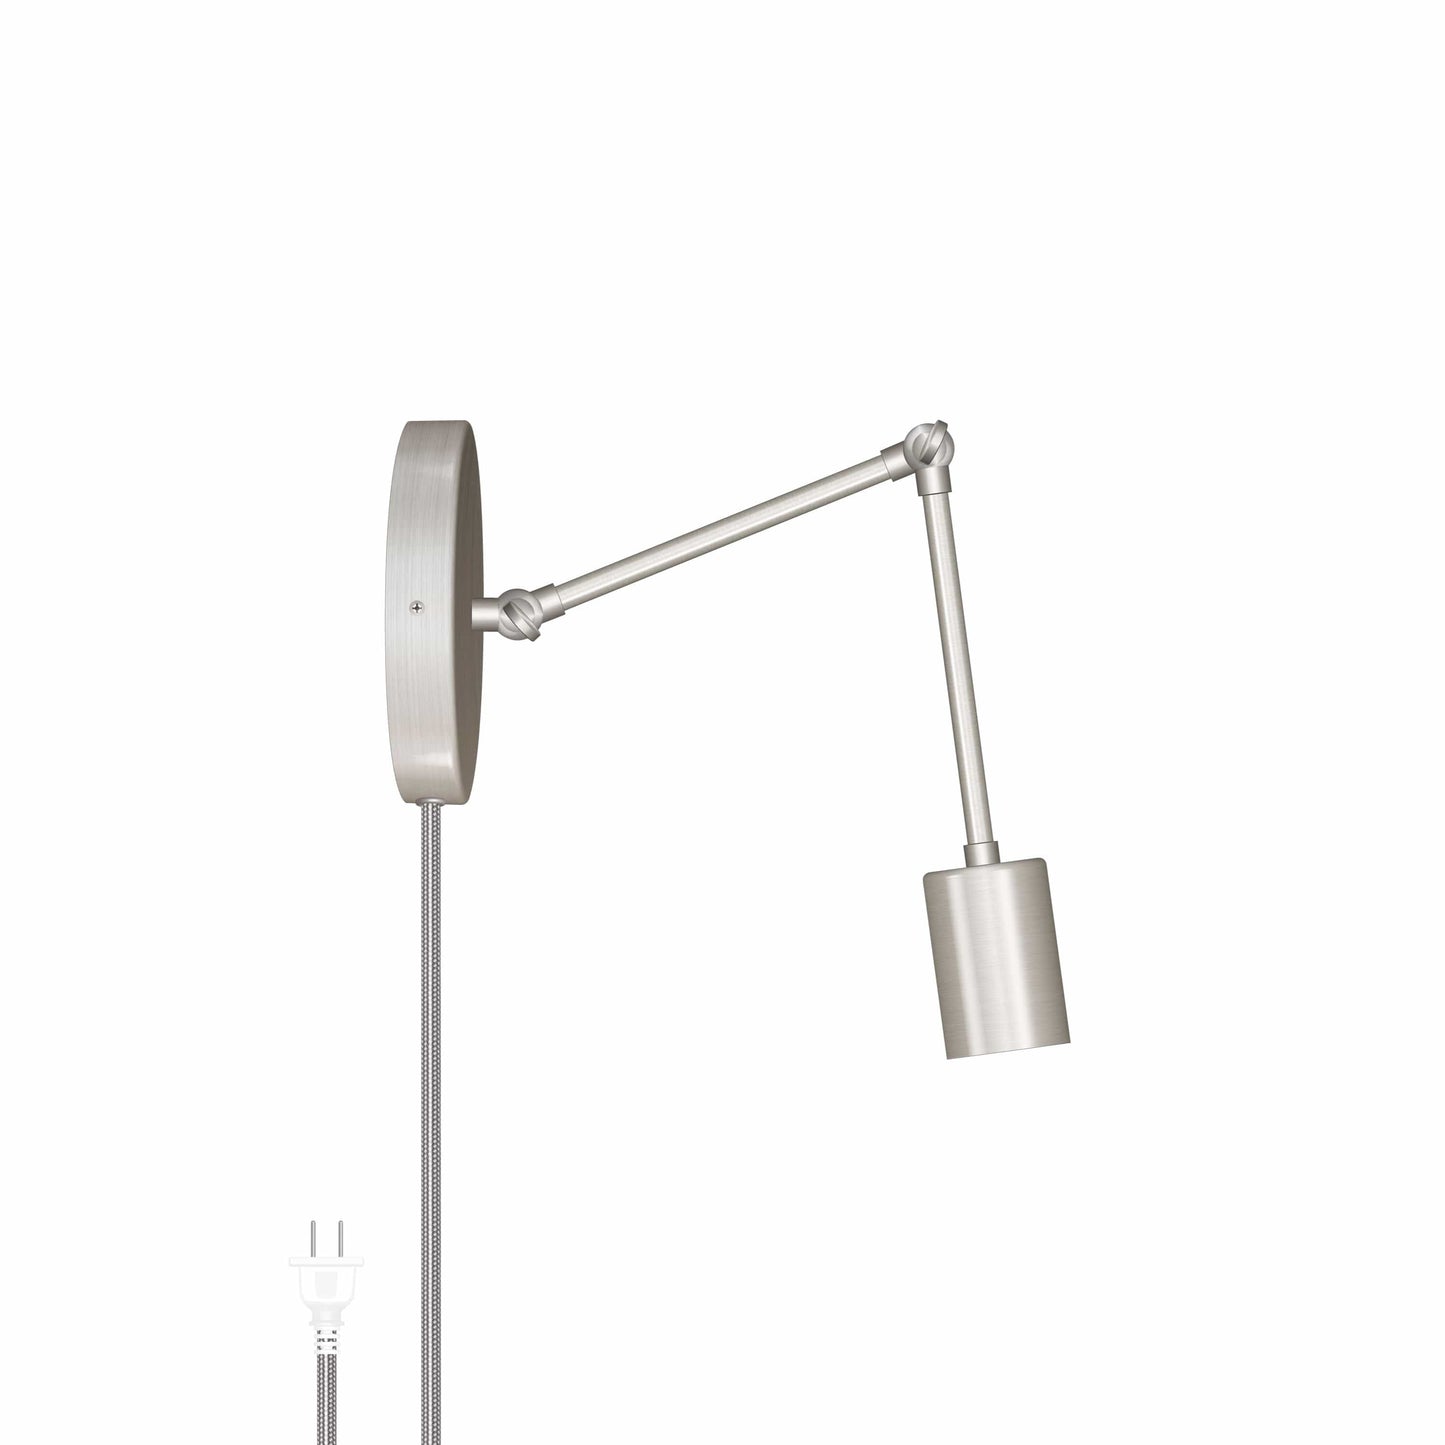 Hinge Plug-In Double Solo Sconce